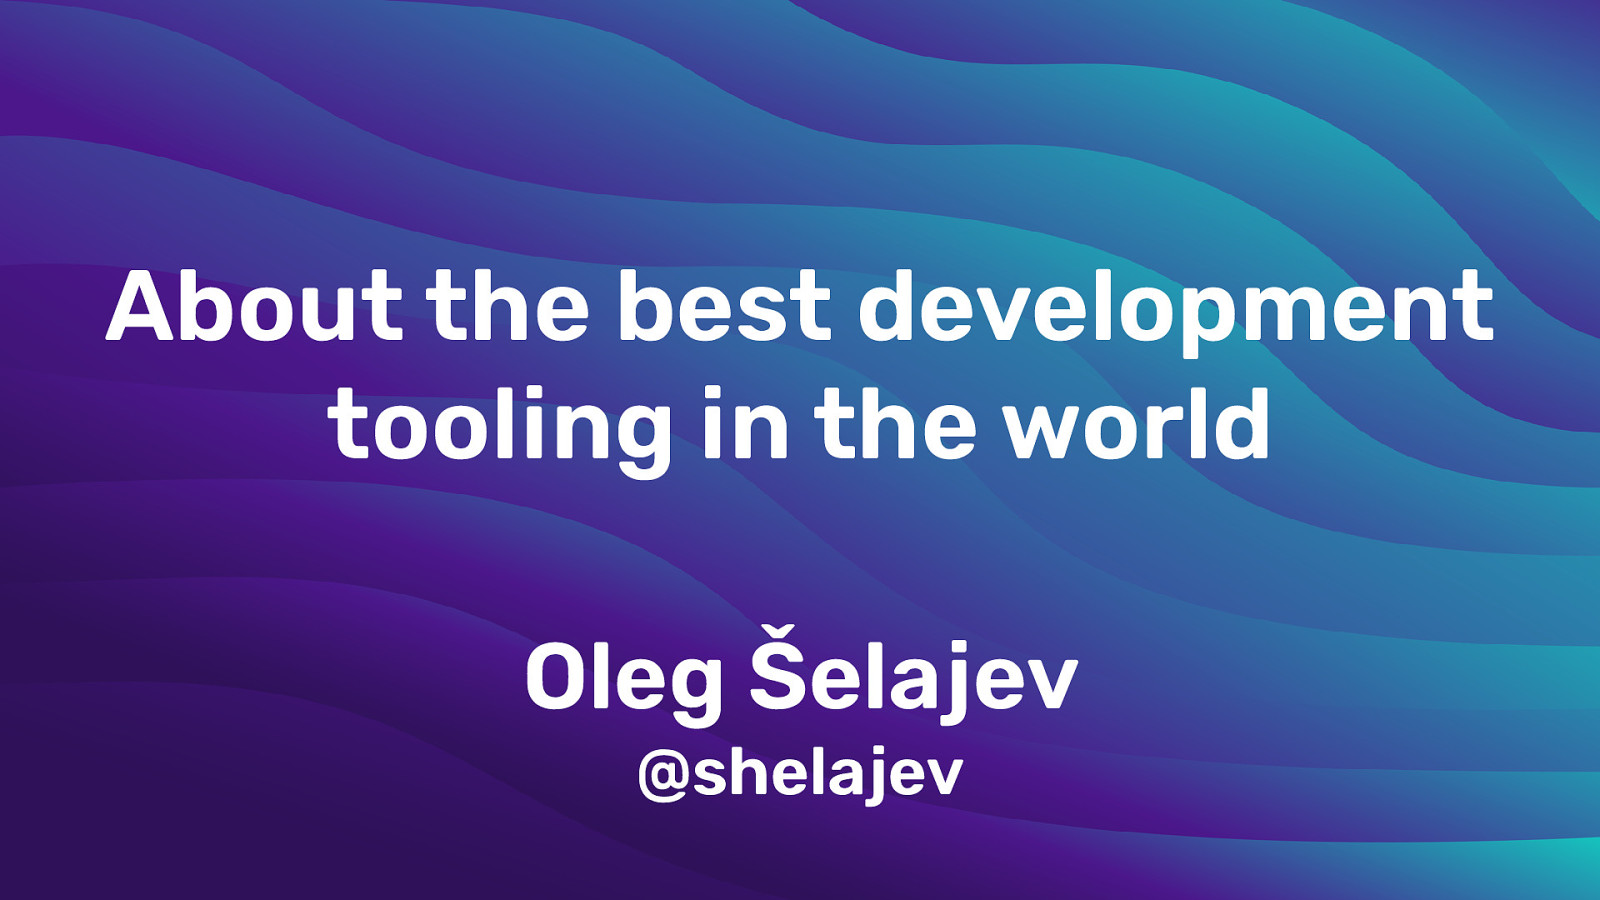 About the best development tooling in the world by Oleg Šelajev